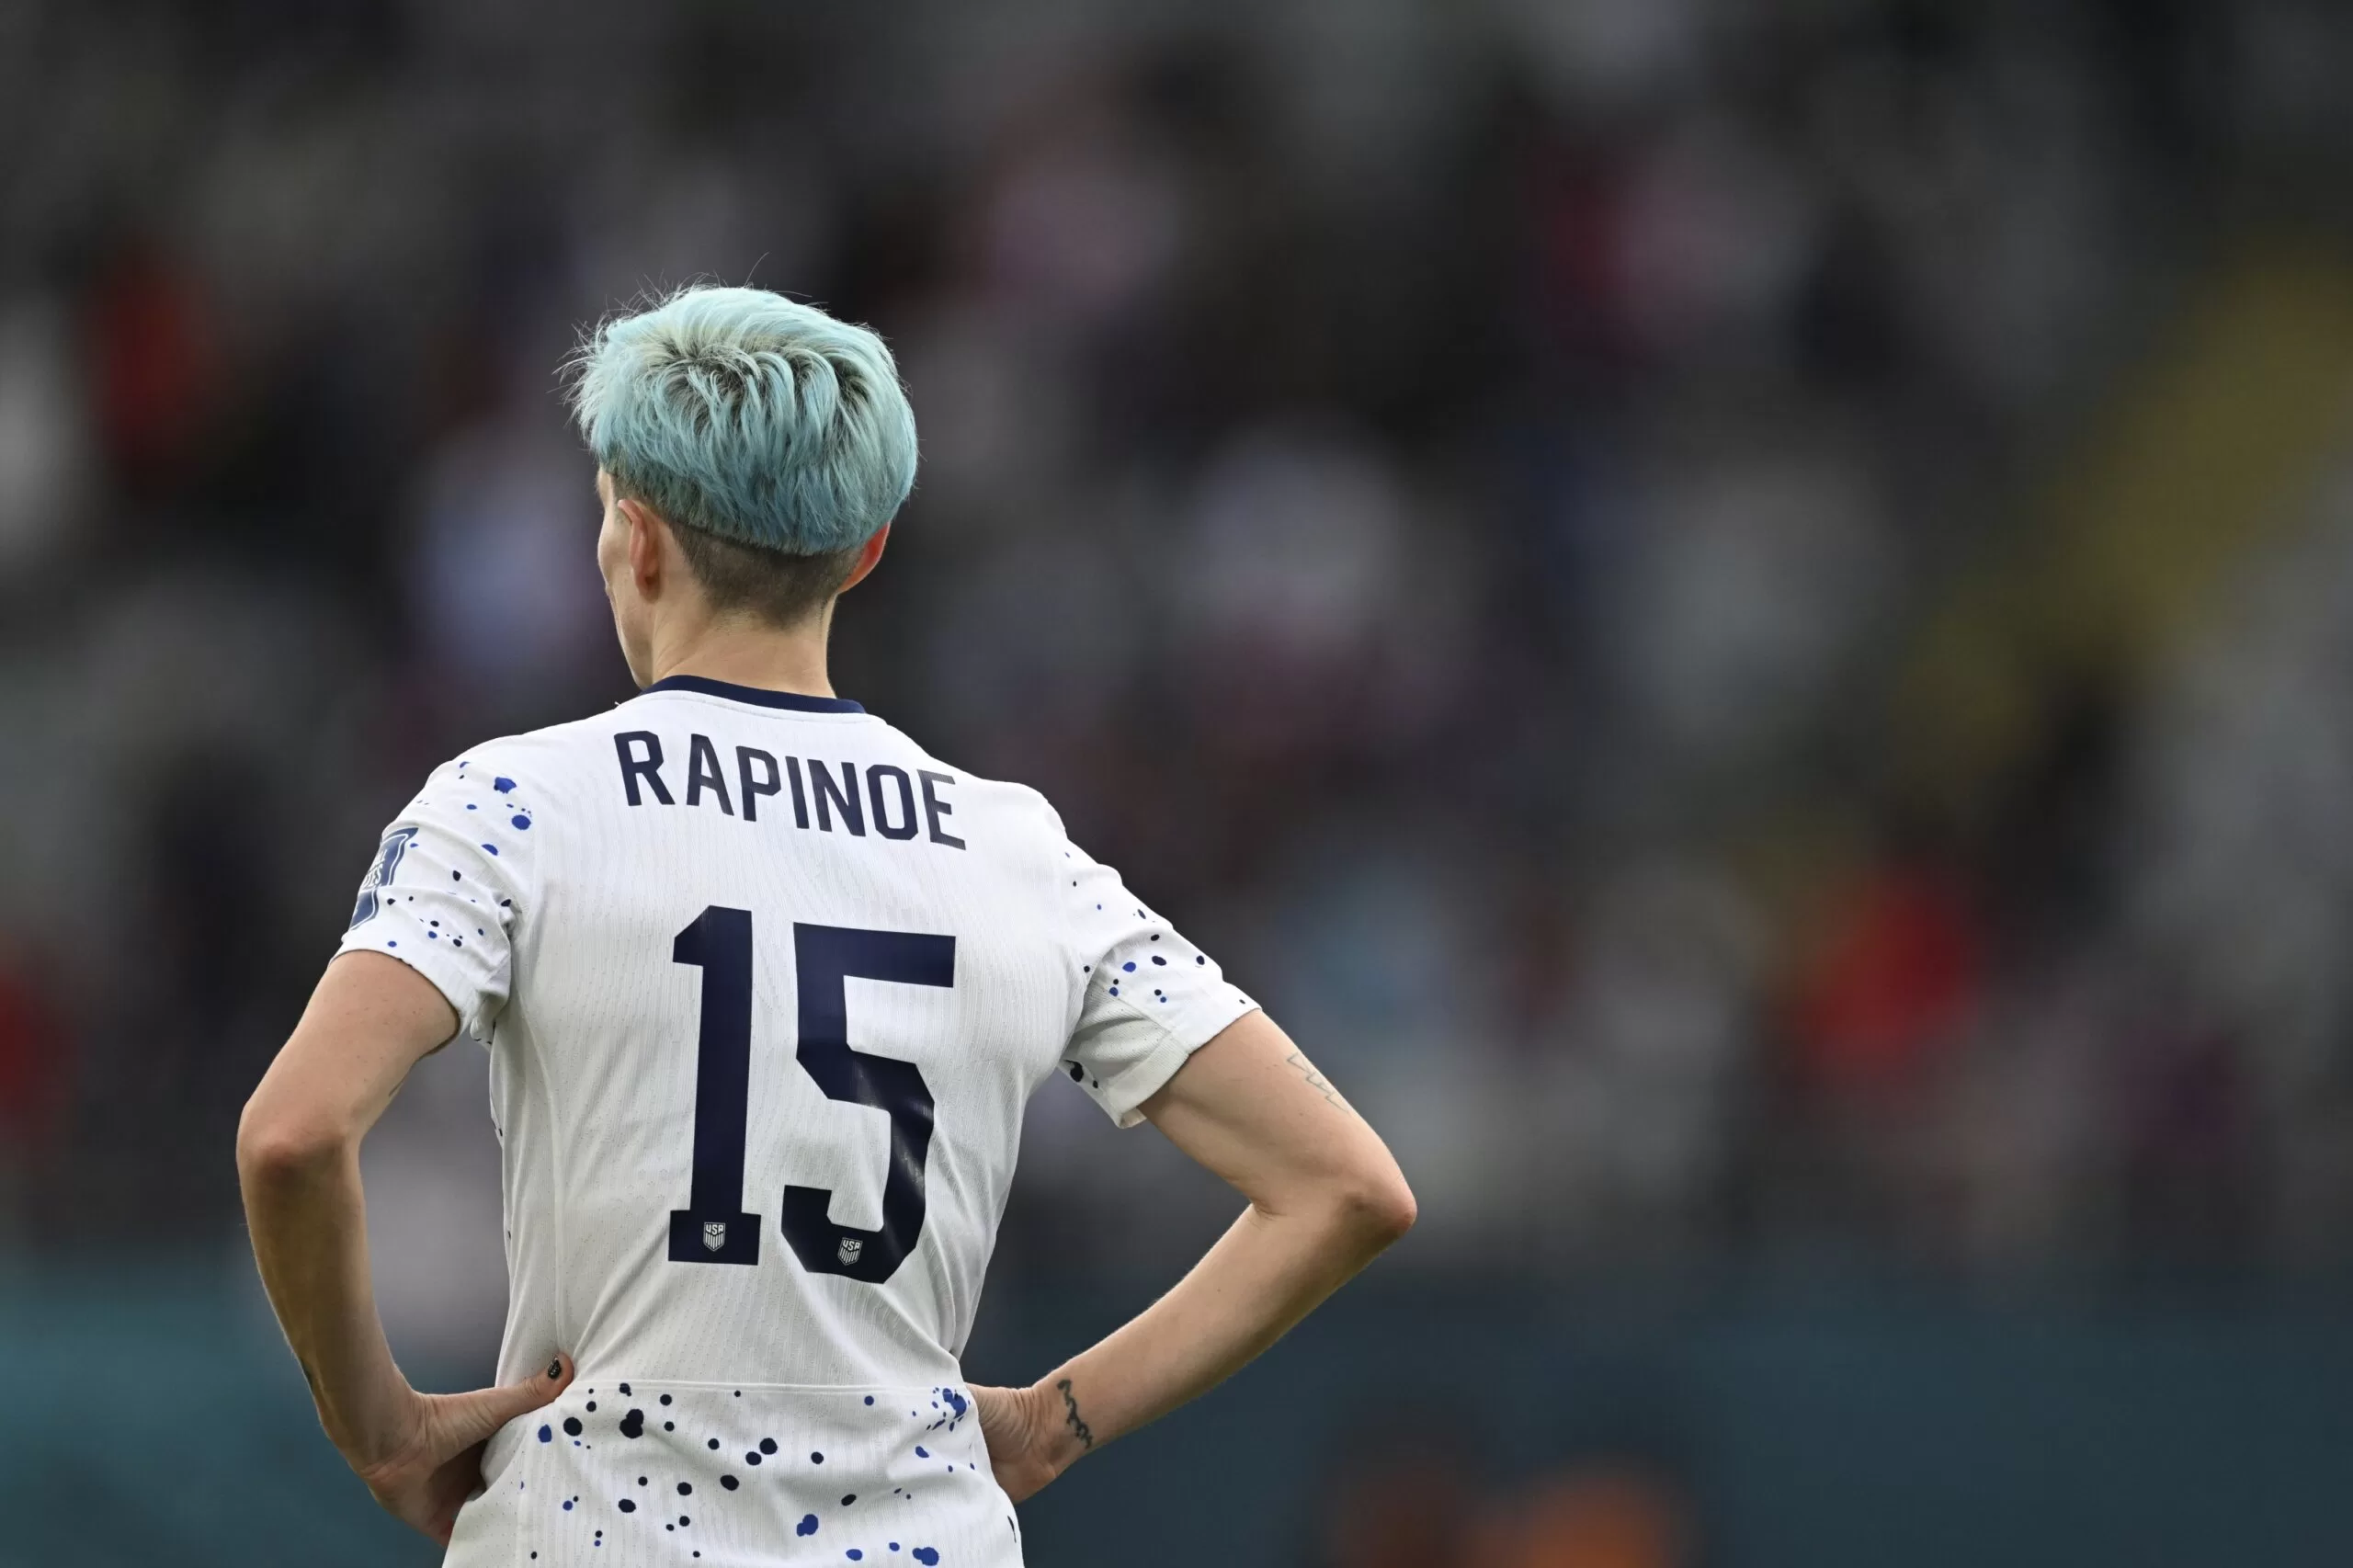 US and Sweden meet again in a Women’s World Cup match that will eliminate either Rapinoe or Seger
